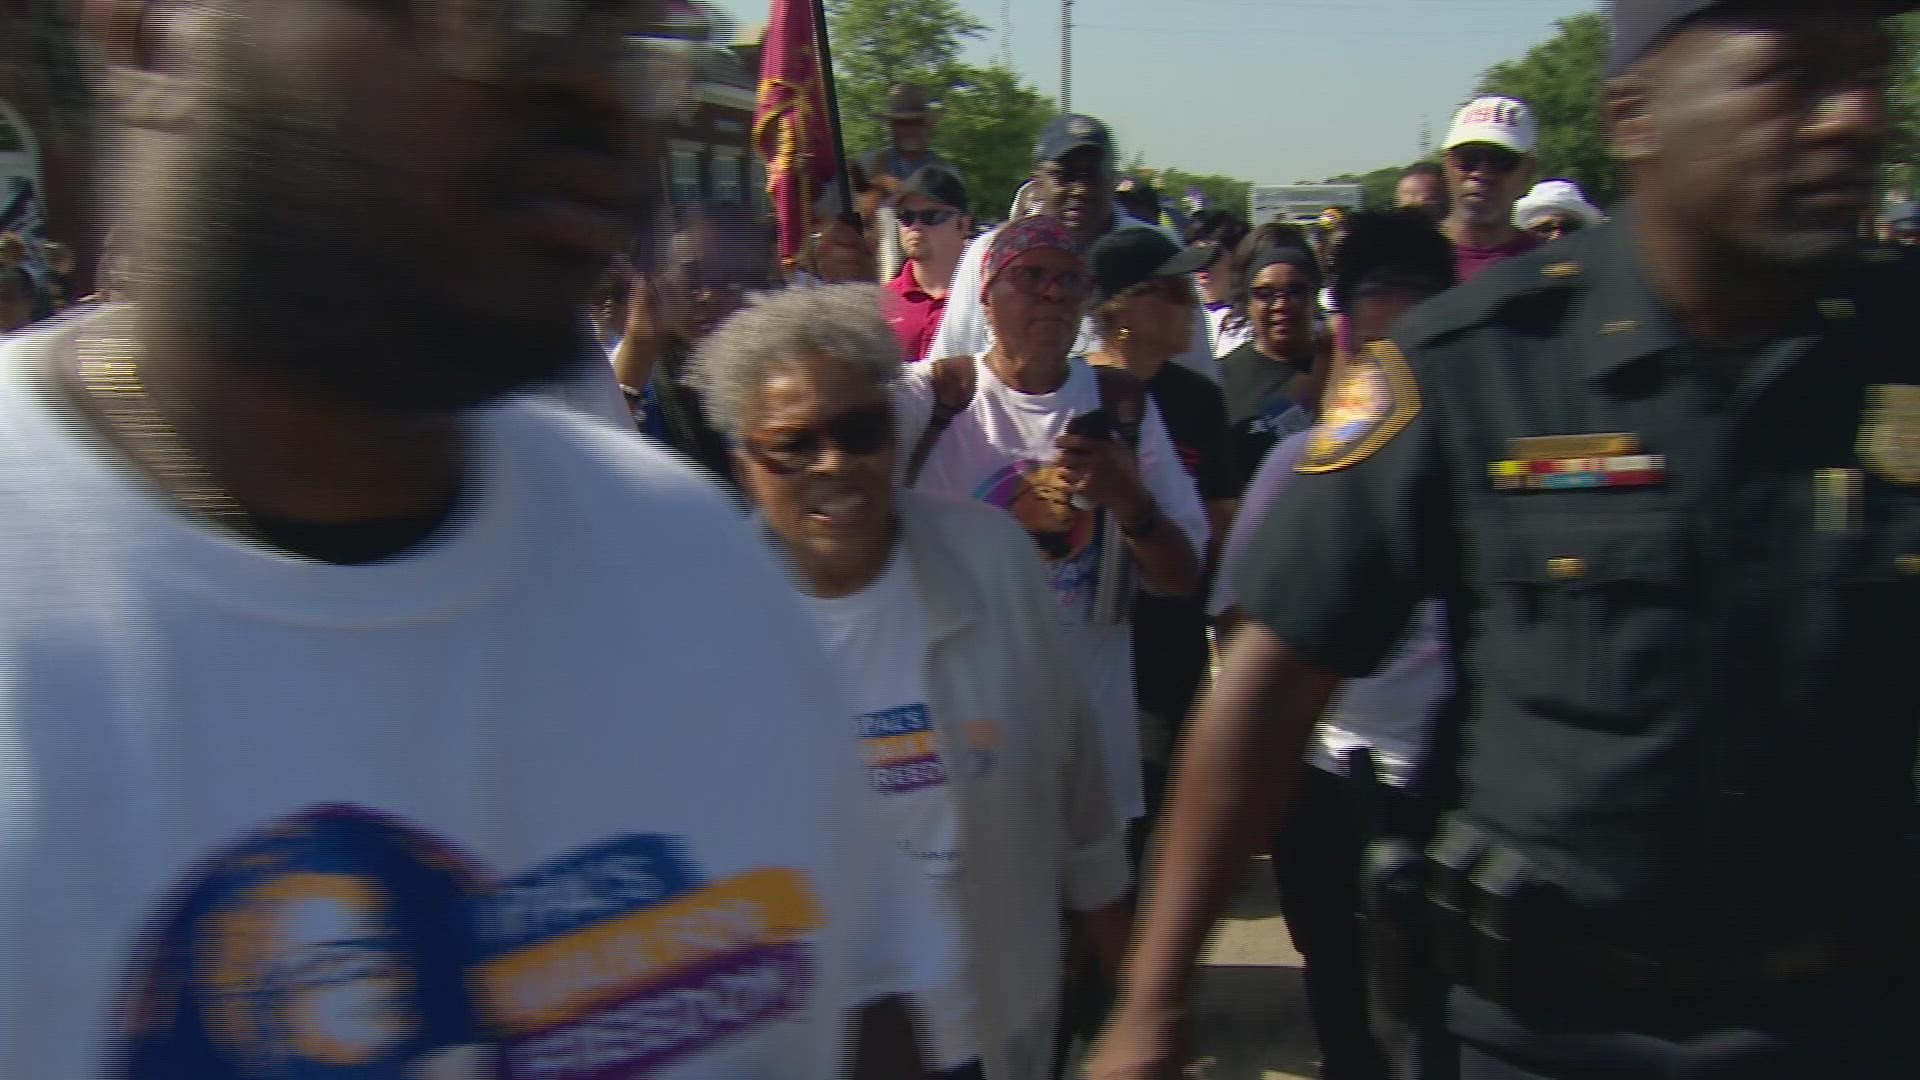 Opal Lee, often called the "grandmother of Juneteenth" was at the front of the 2.5-mile long march this year in Fort Worth.